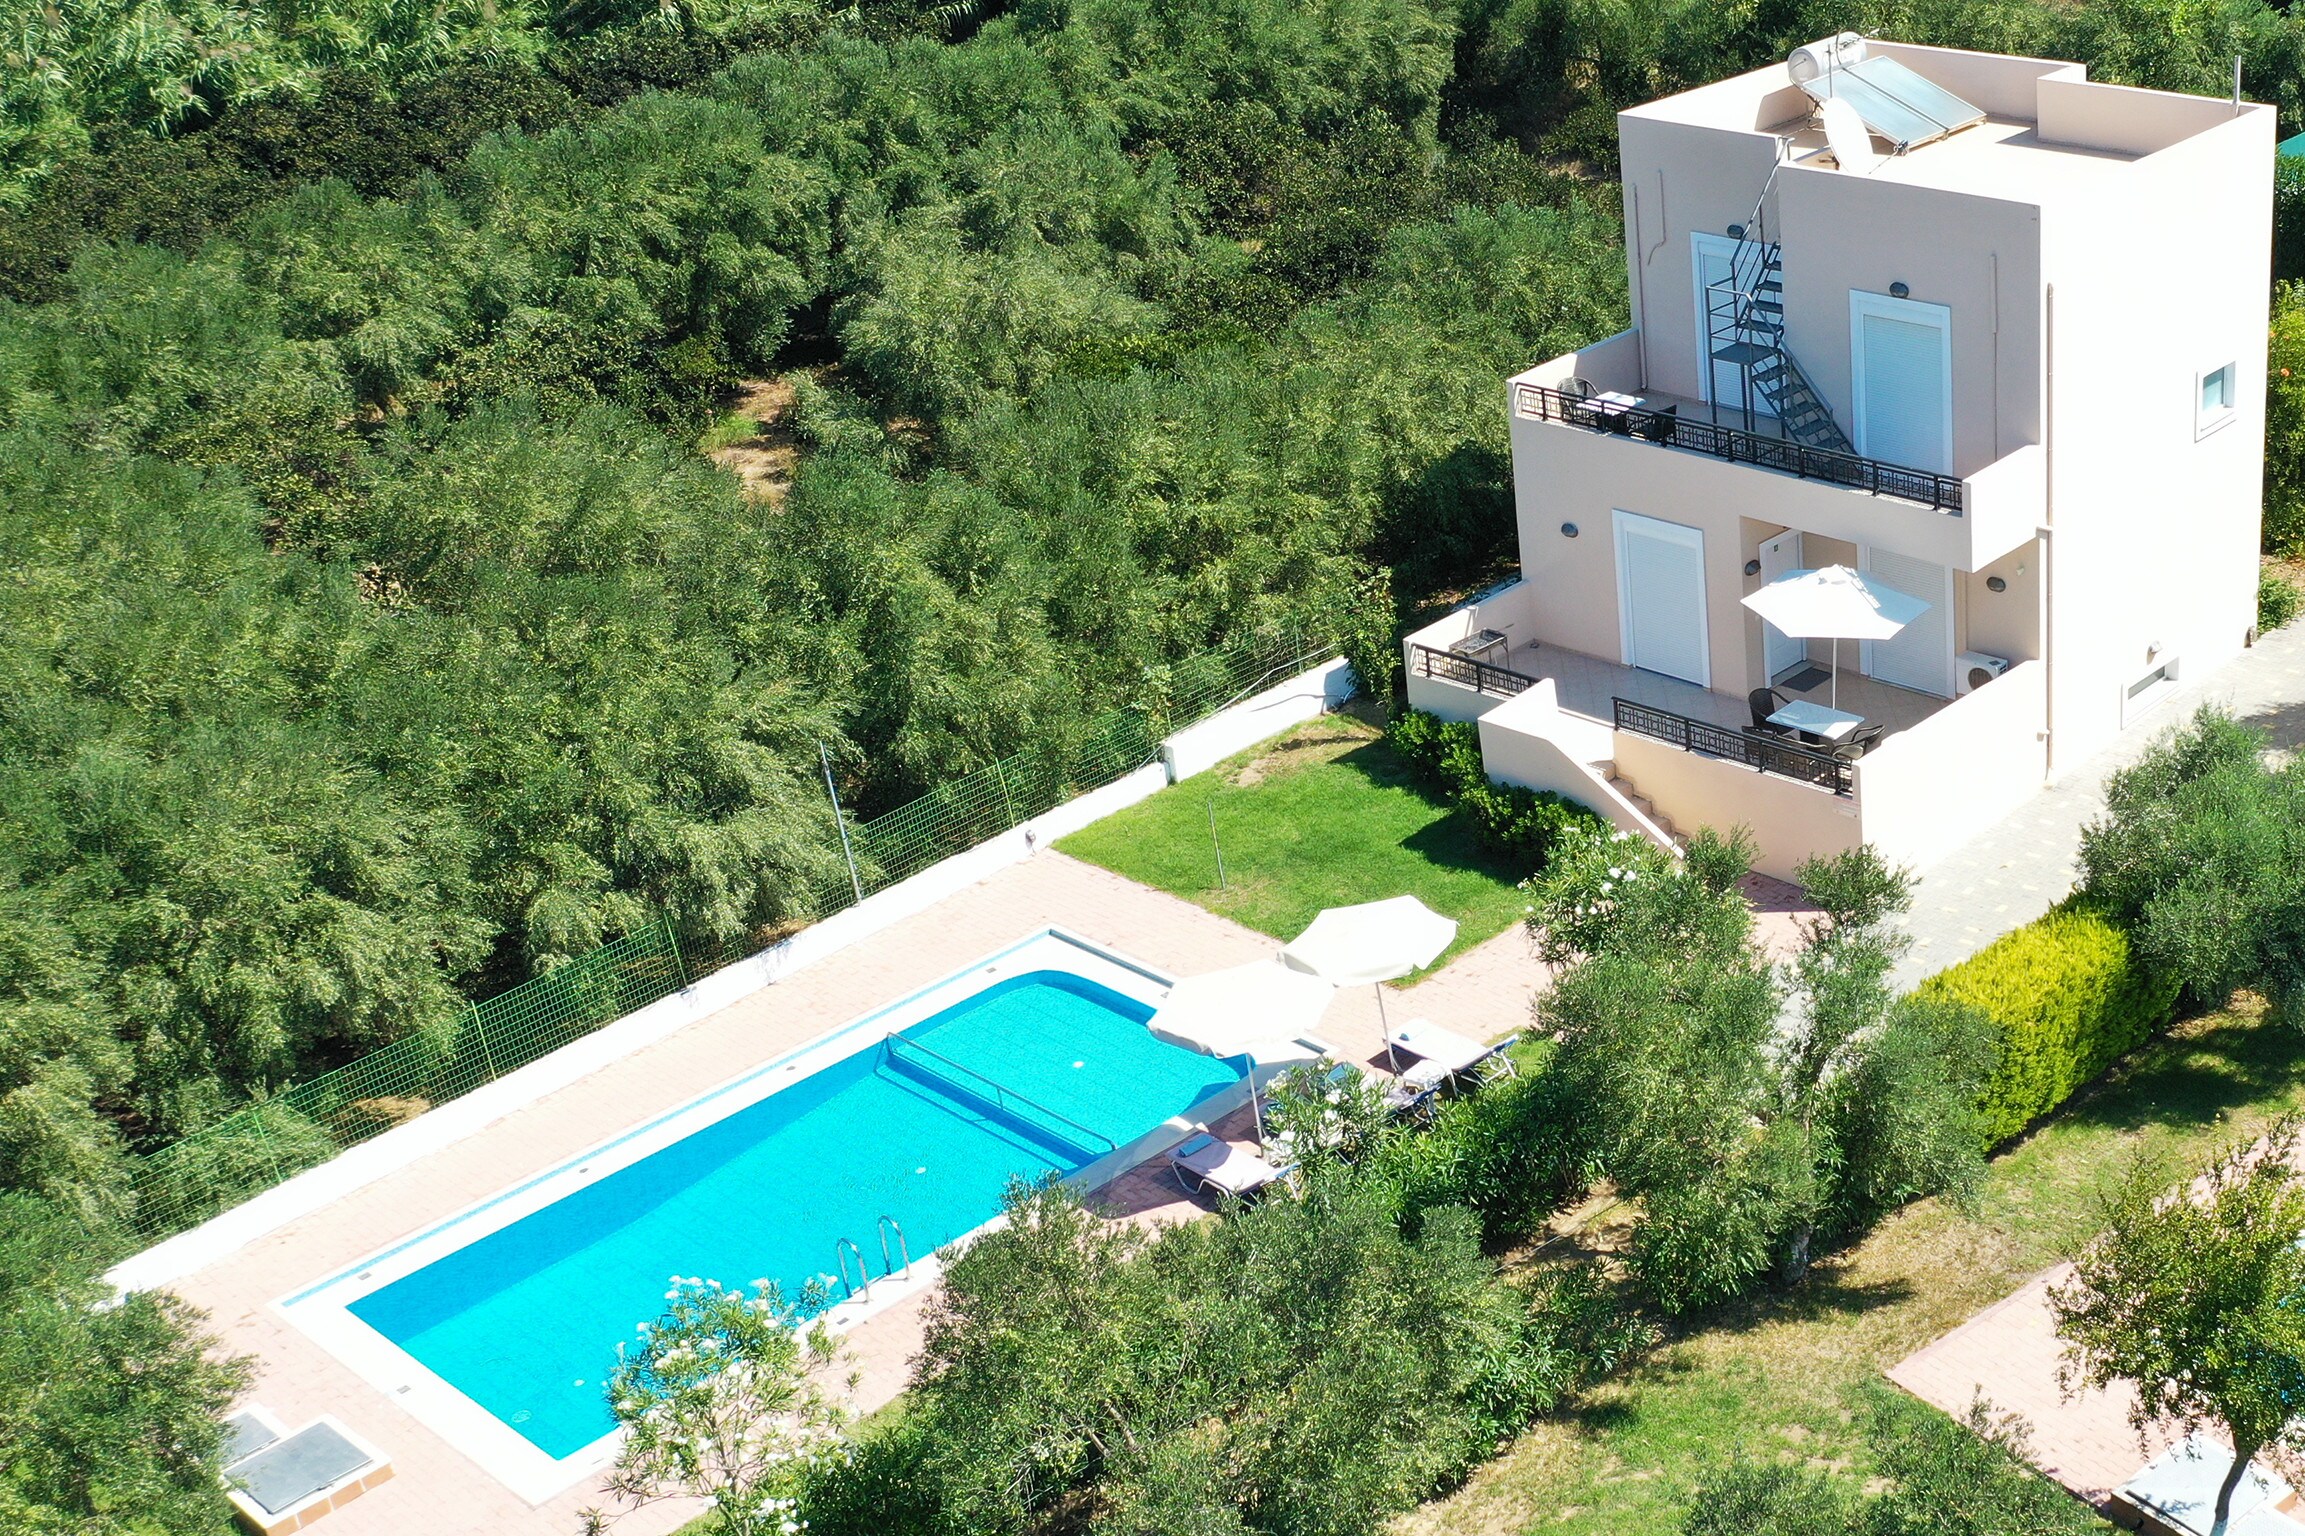 Aerial view of the villa in Walking distance to the beach, Near tavern, Chania, Crete